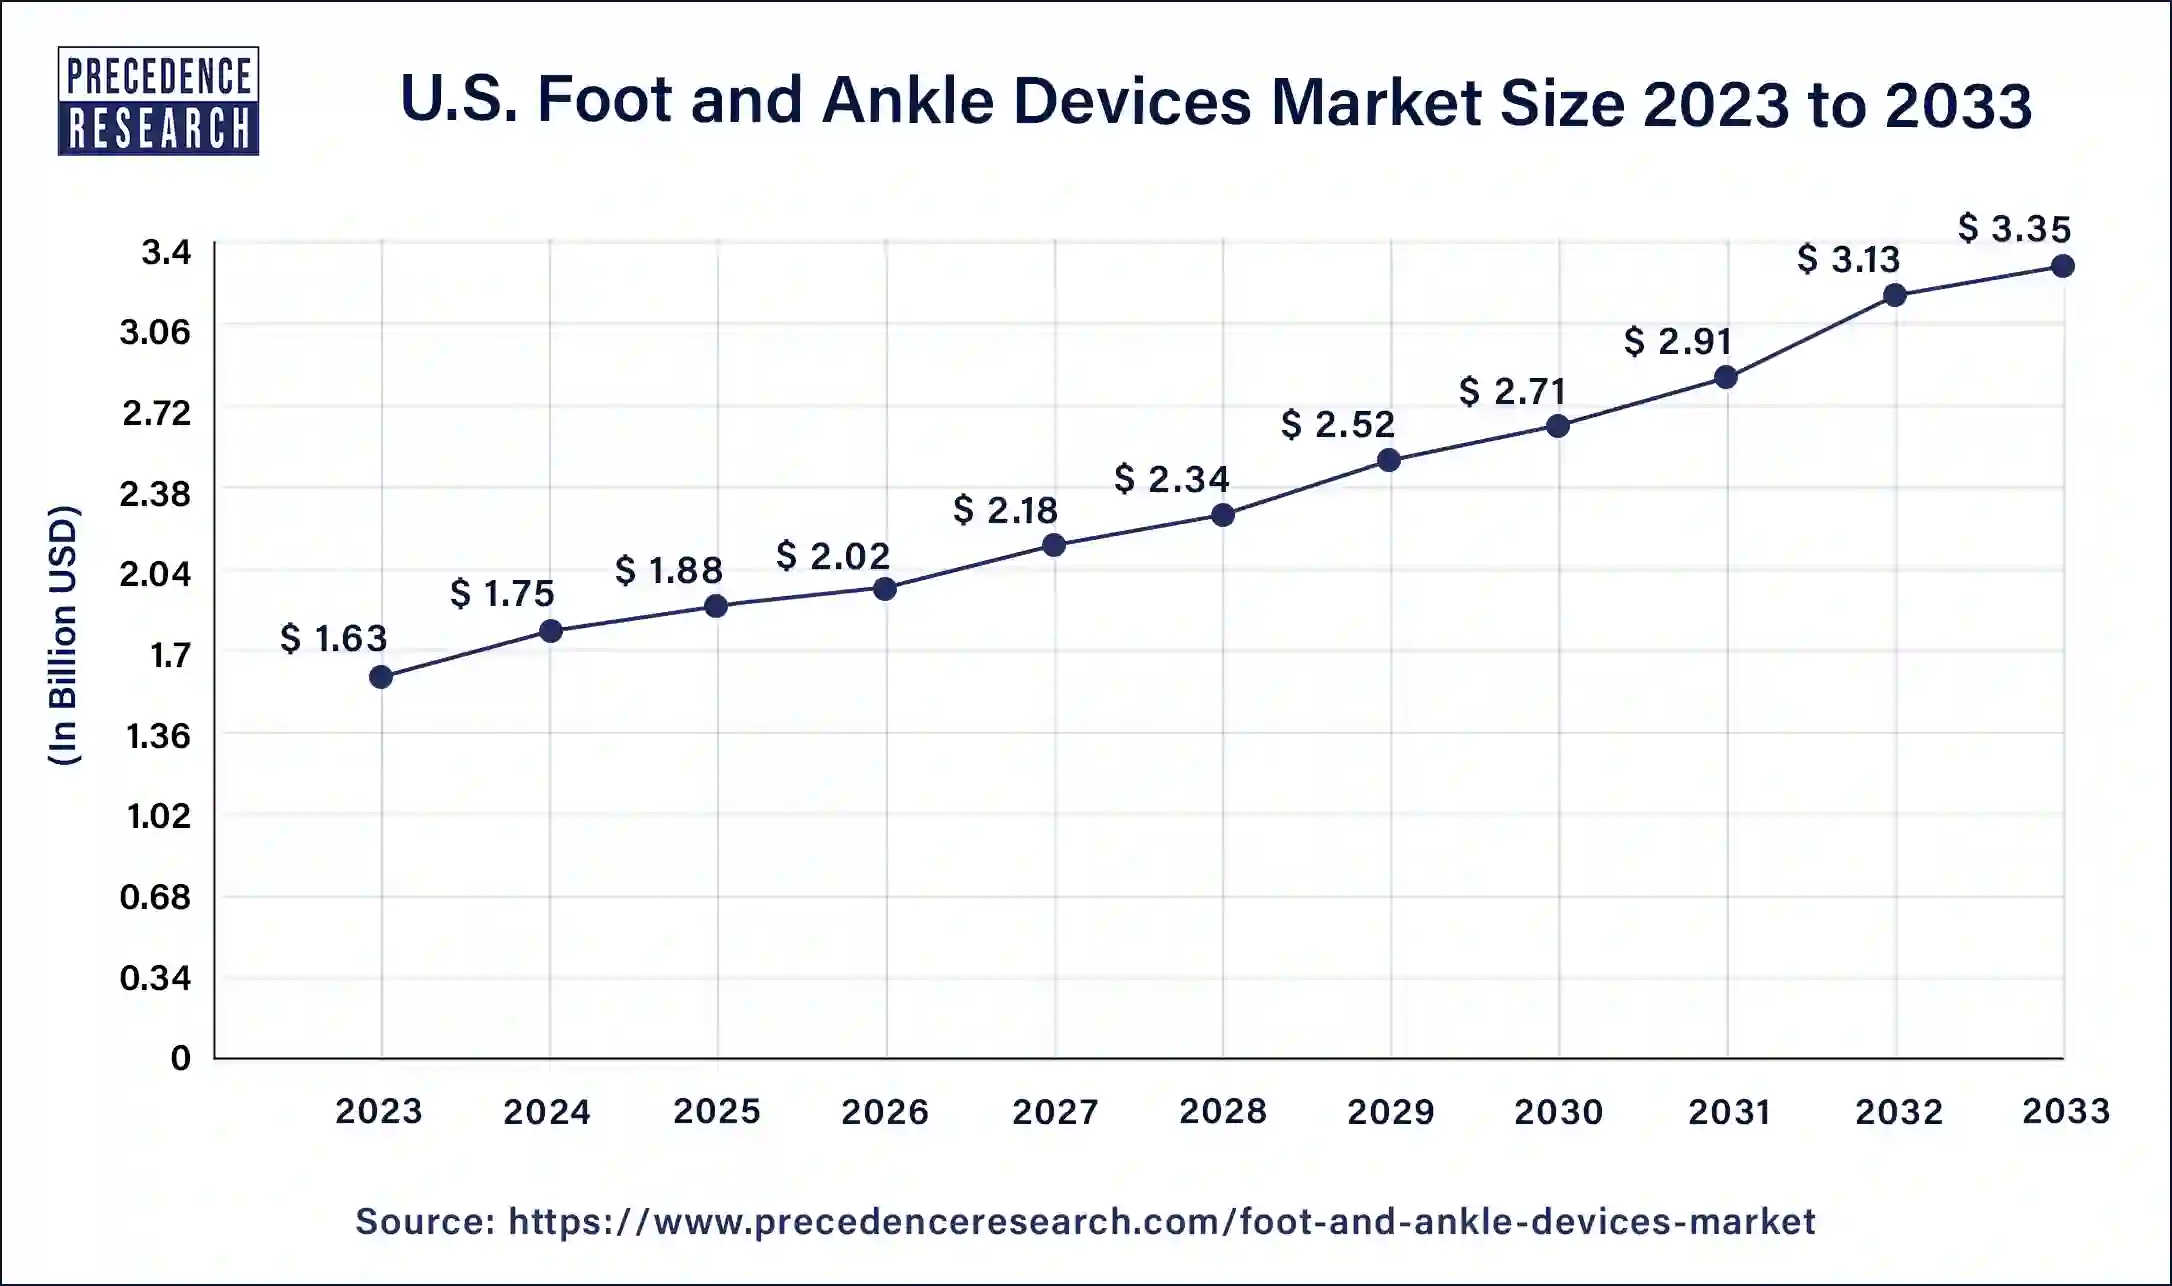 U.S. Foot and Ankle Devices Market Size 2024 to 2033